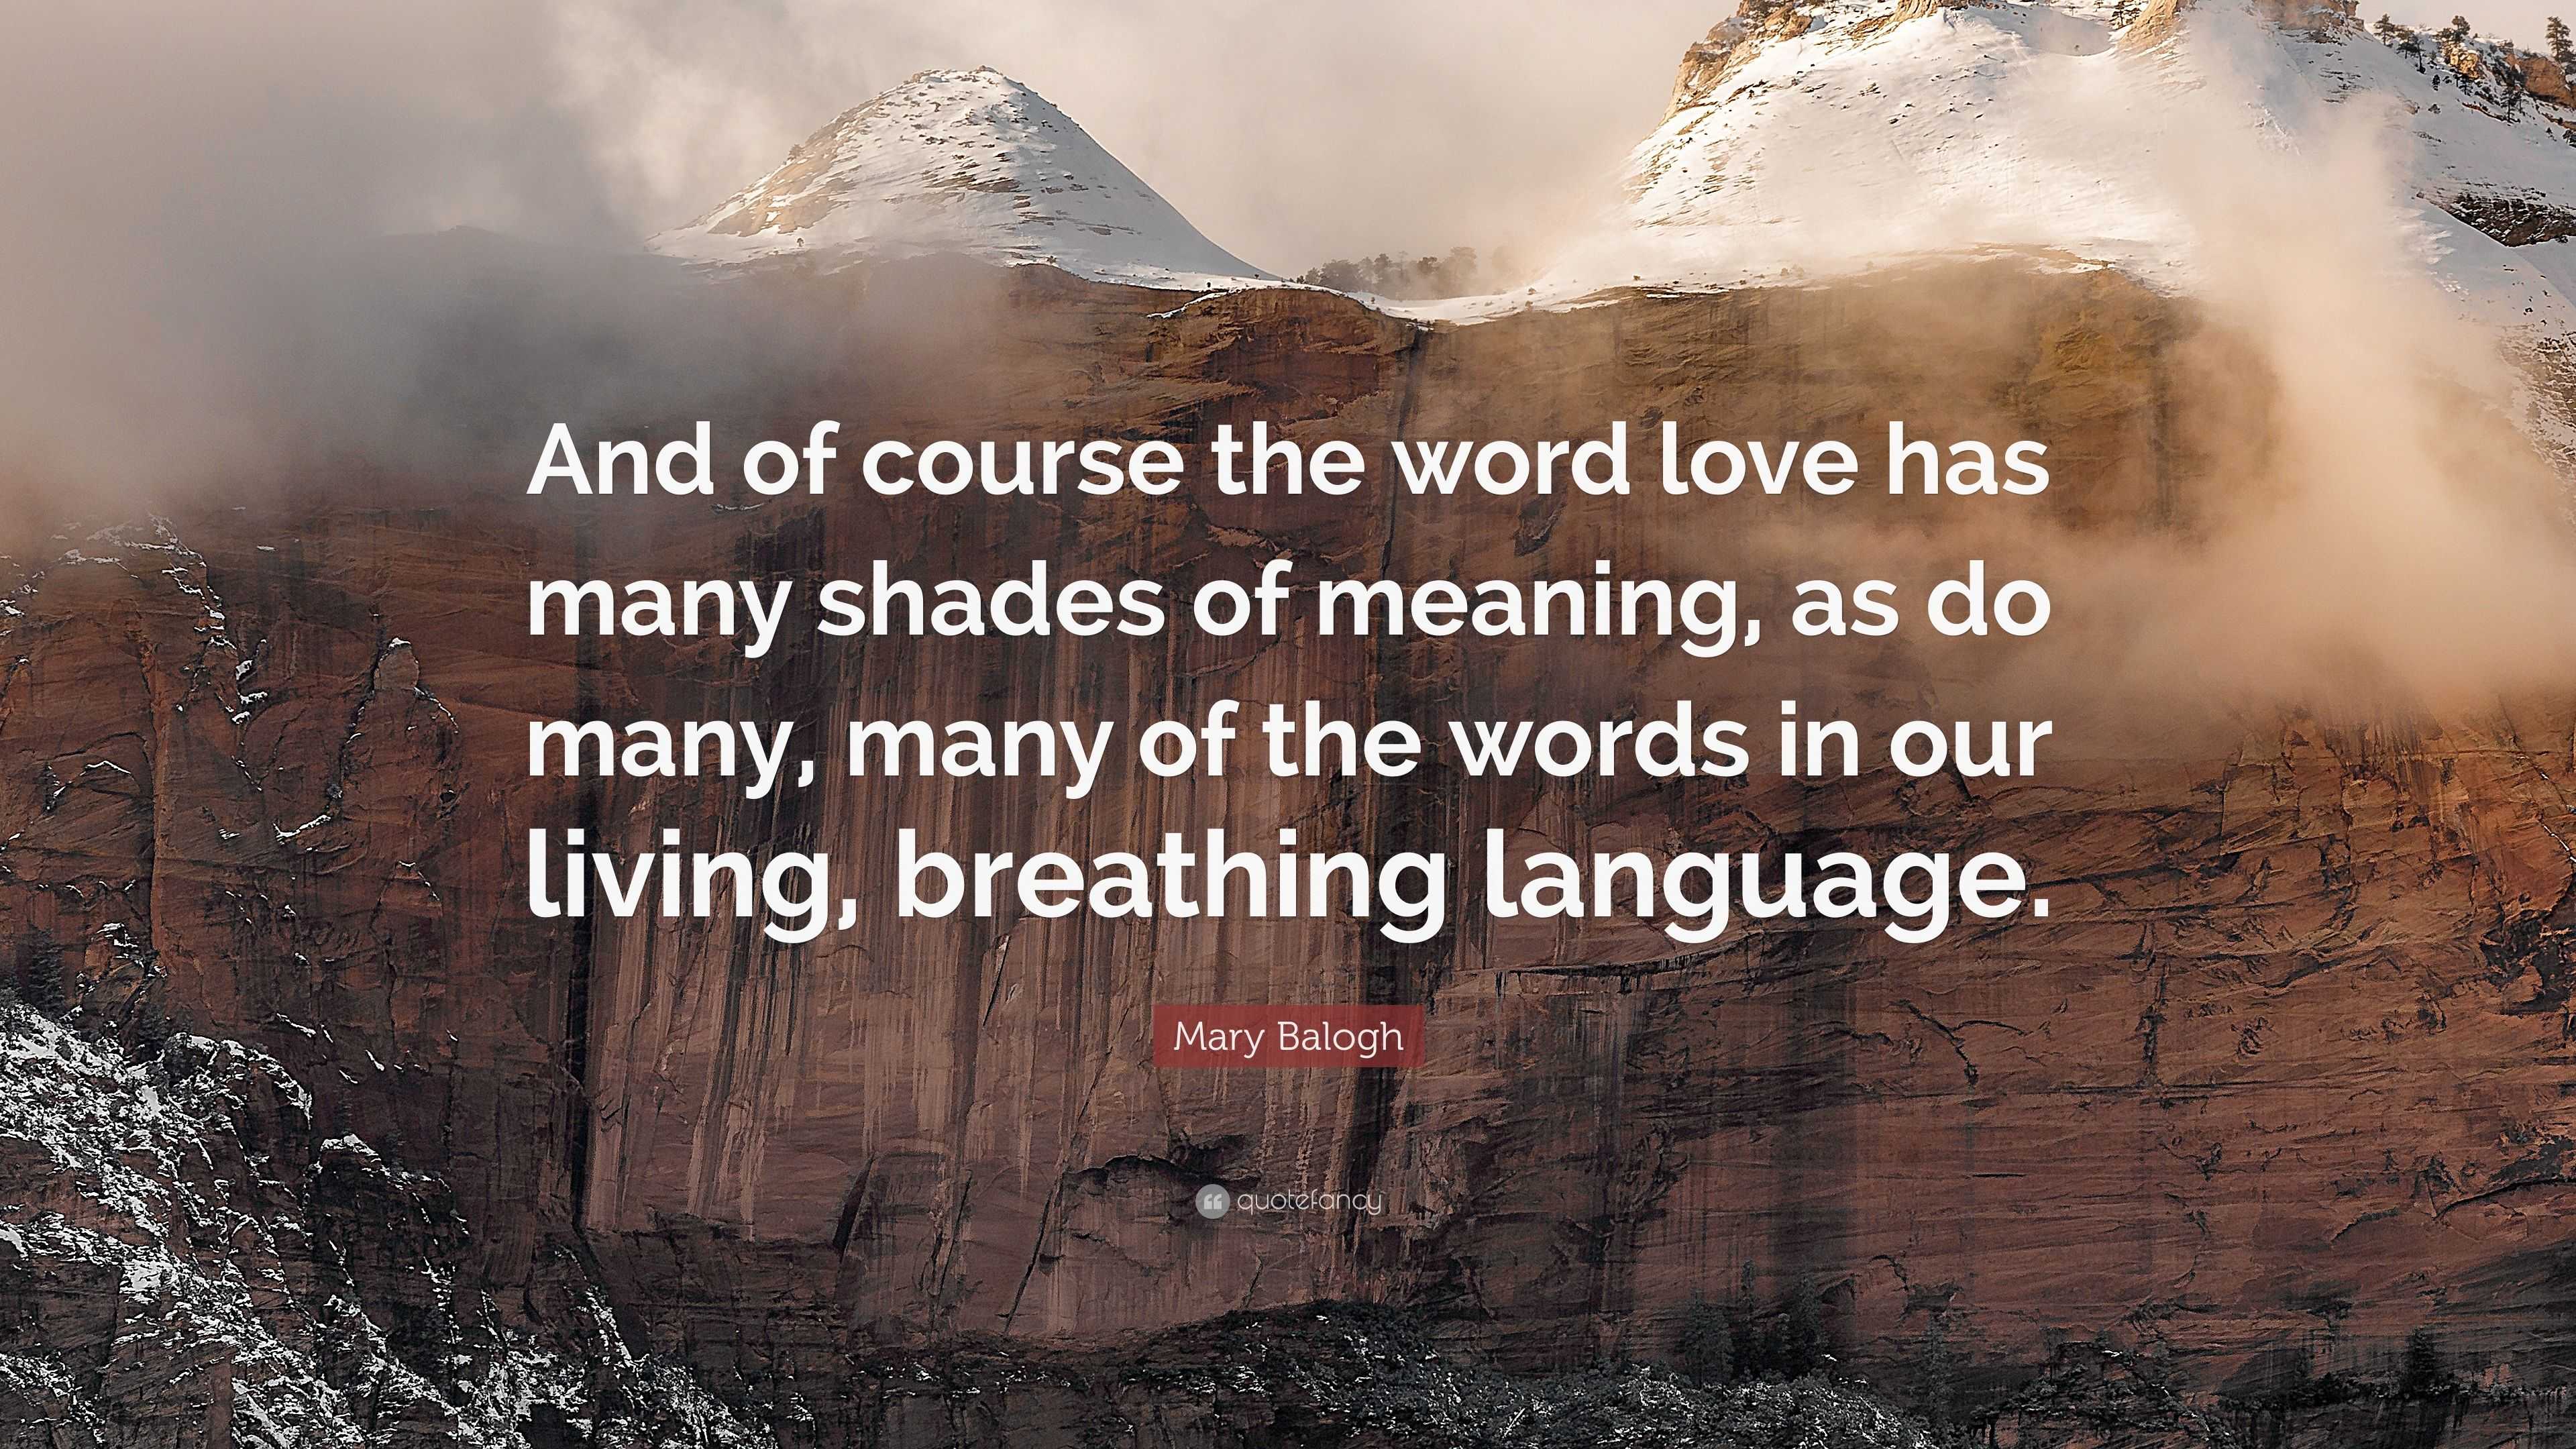 Mary Balogh Quote: “And of course the word love has many shades of ...